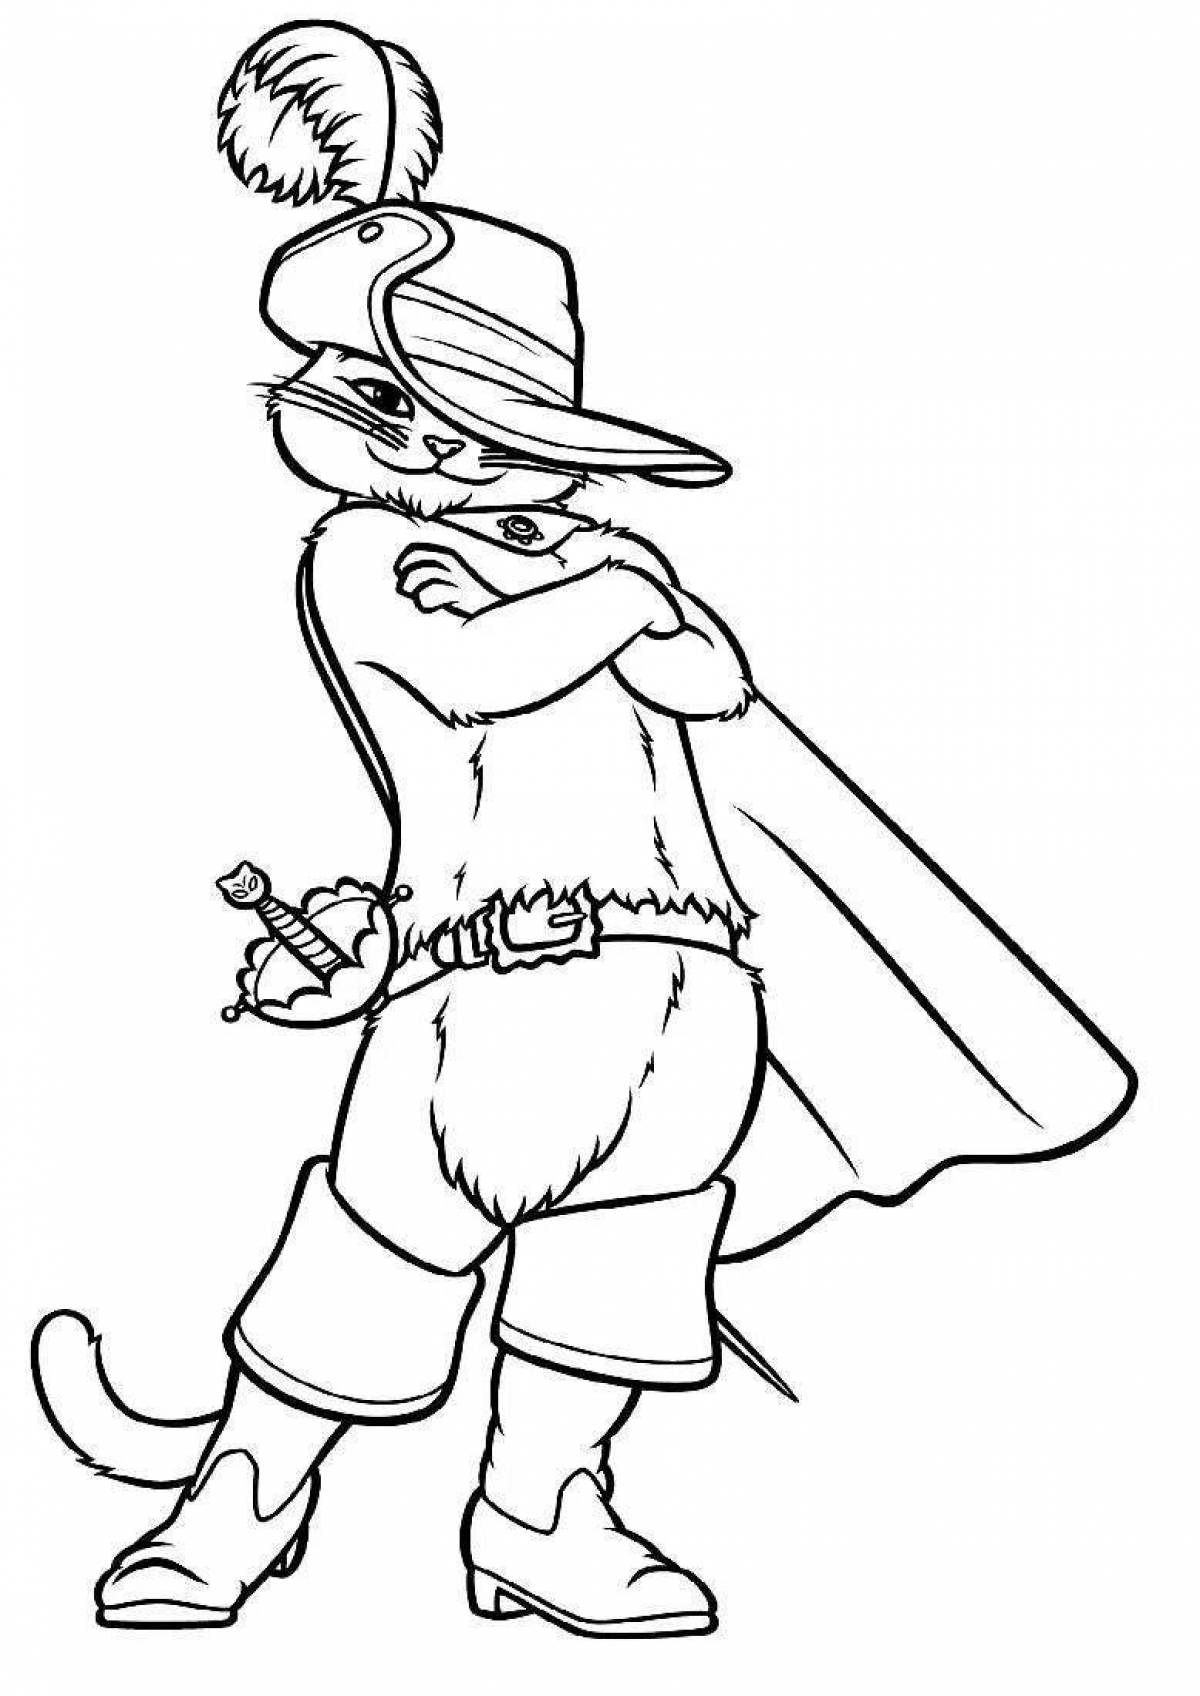 Coloring book shining puss in boots